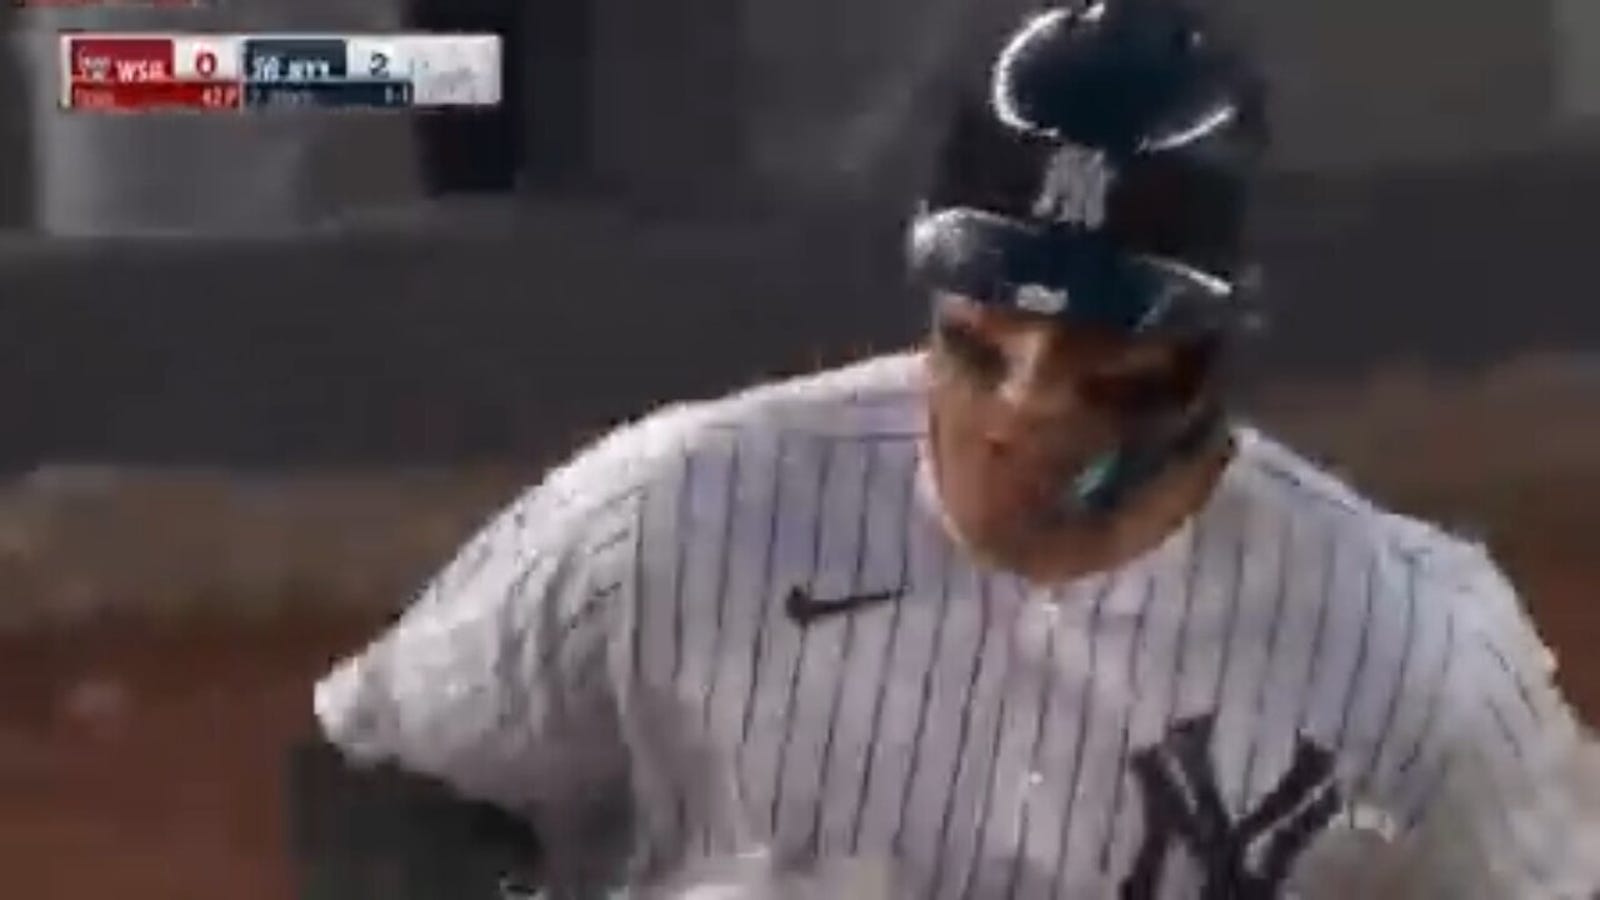 Aaron Judge homers twice including a grand slam and extends the Yankees' lead over the Nationals